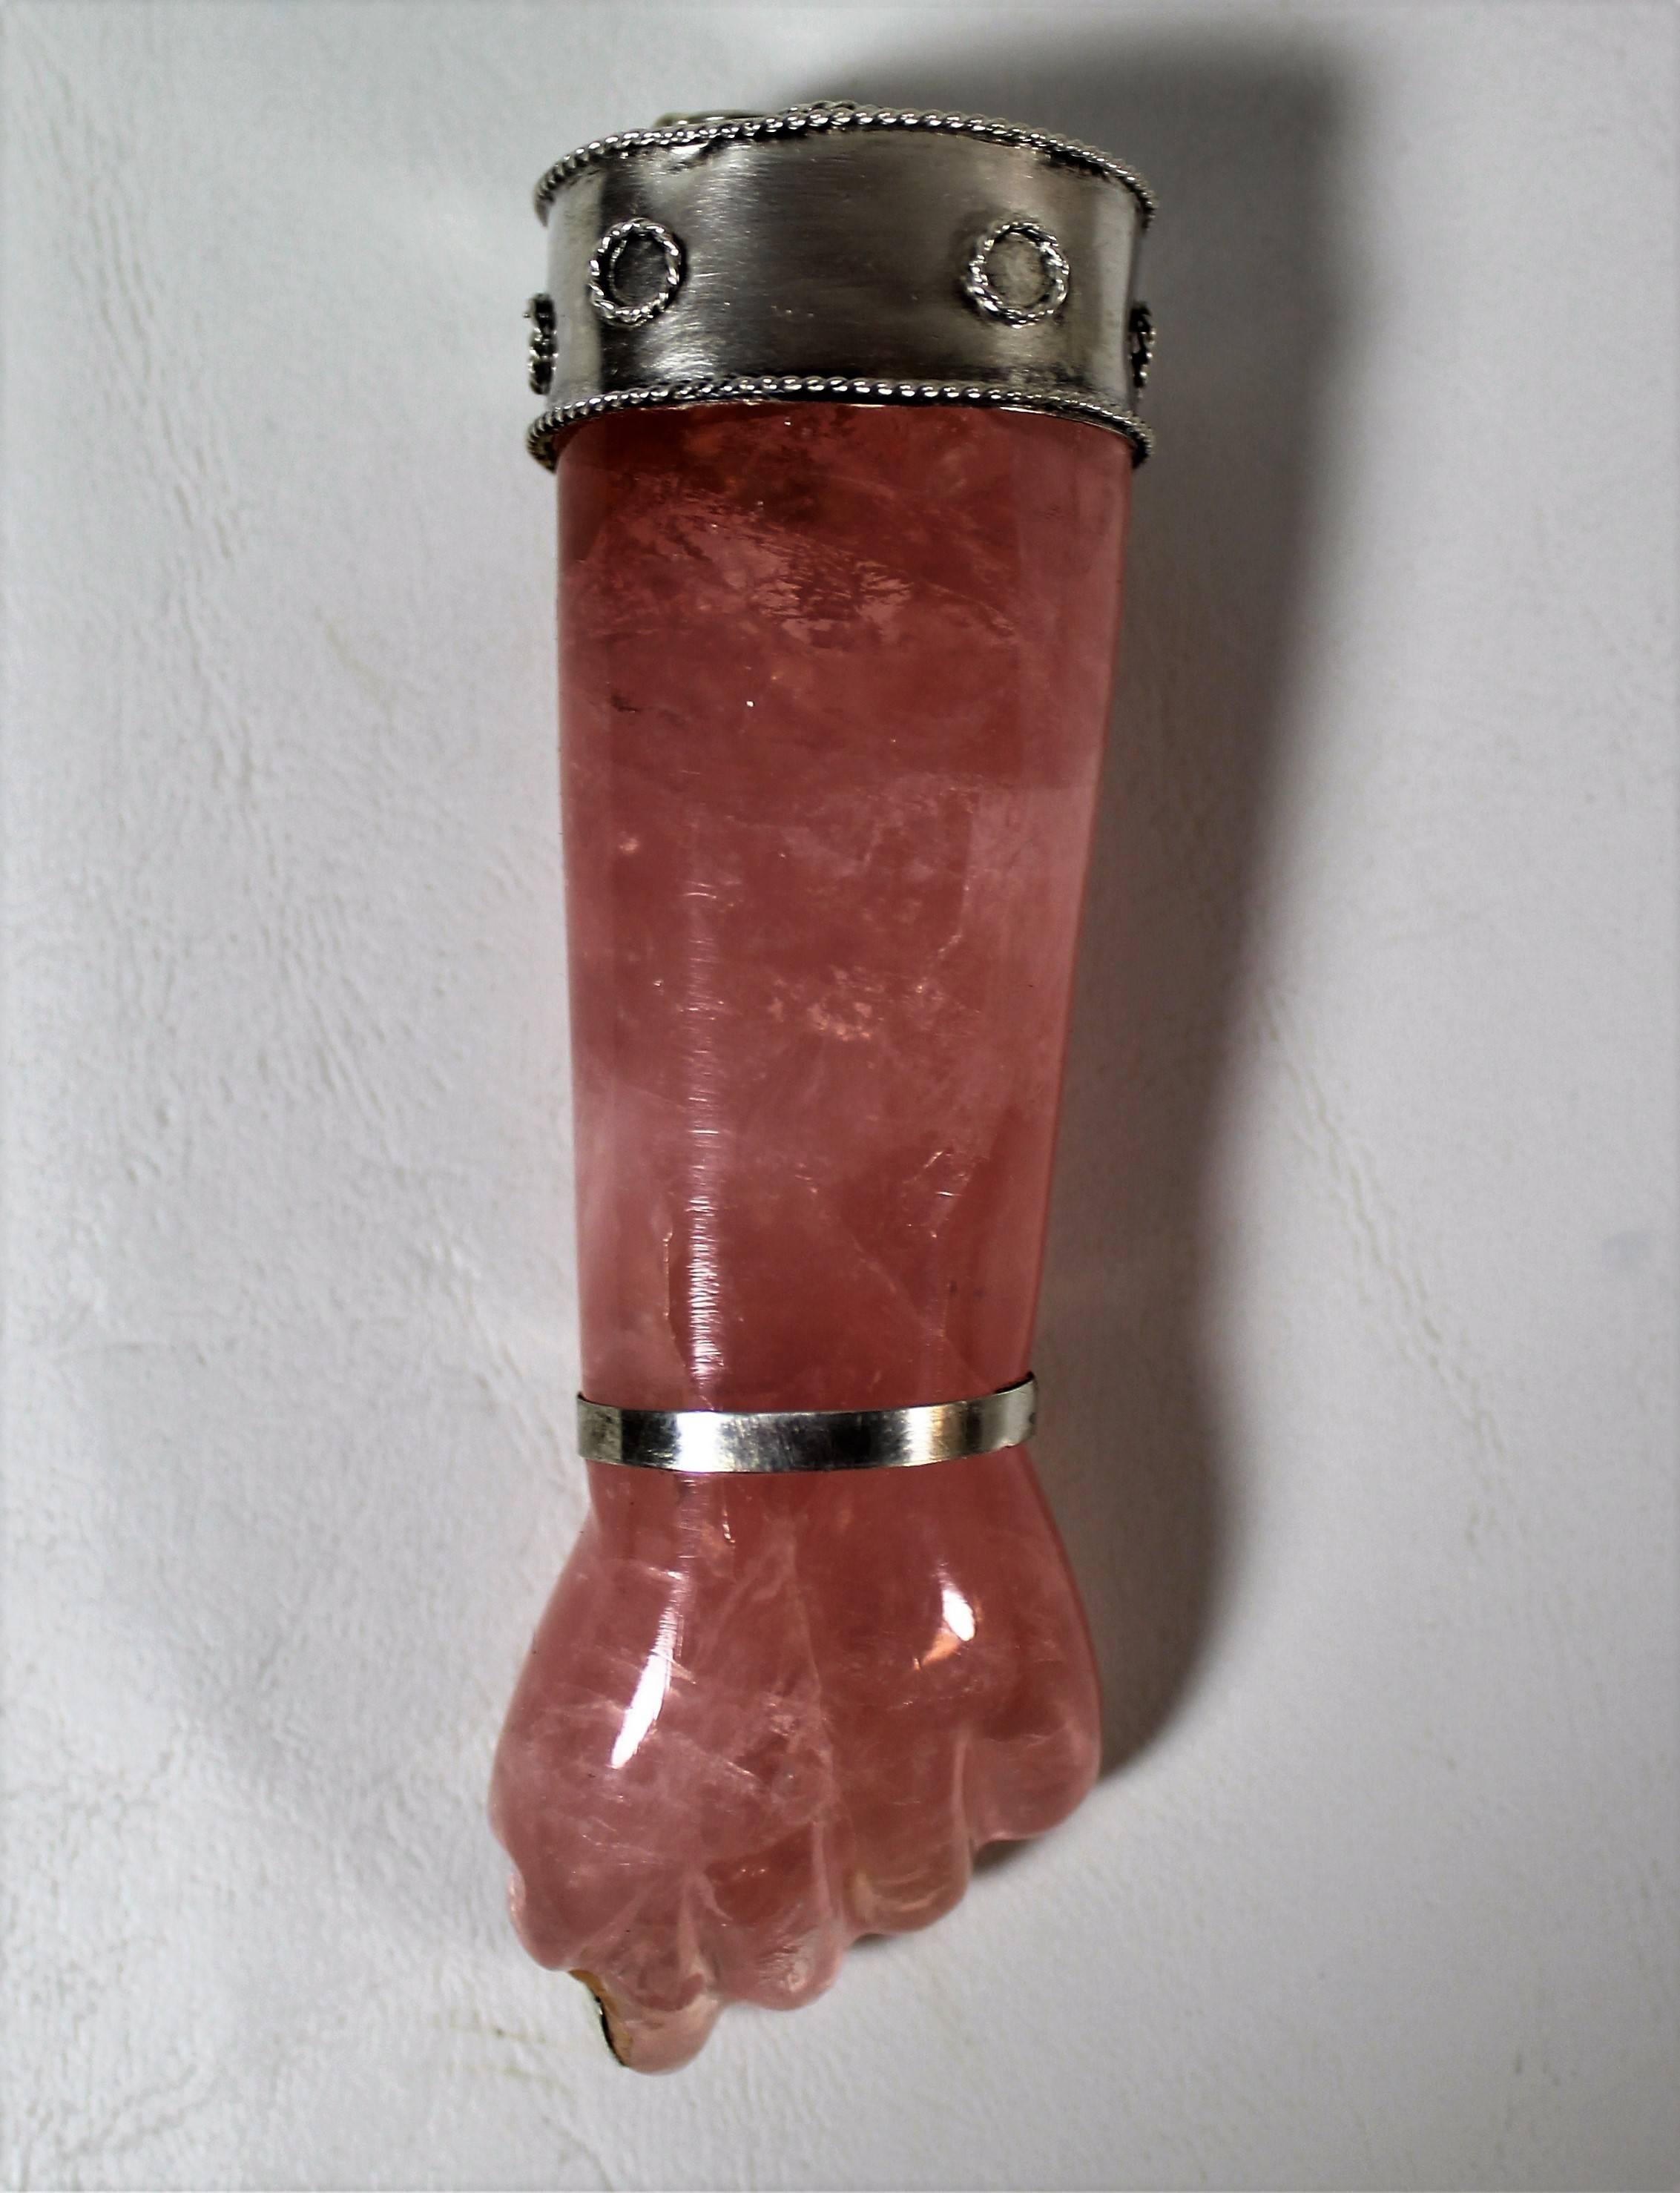 Brazilian rose quartz and silver pendant in the form of a fist. Significant size and weight for a pendant.